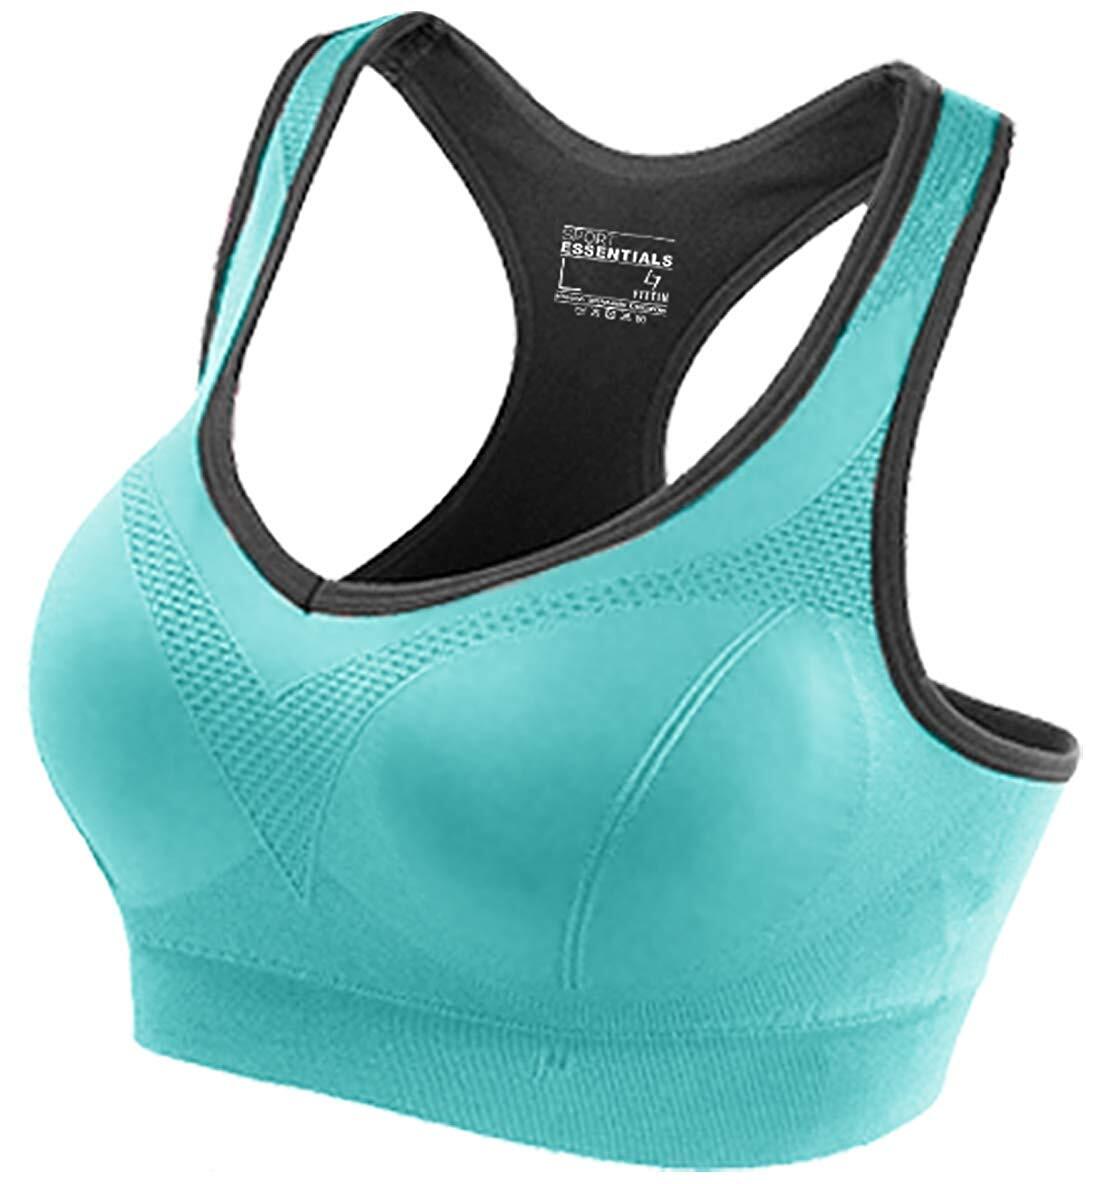 Padded Seamless High Impact Support for Yoga Gym Workout Fitness FITTIN Racerback Sports Bras for Women 